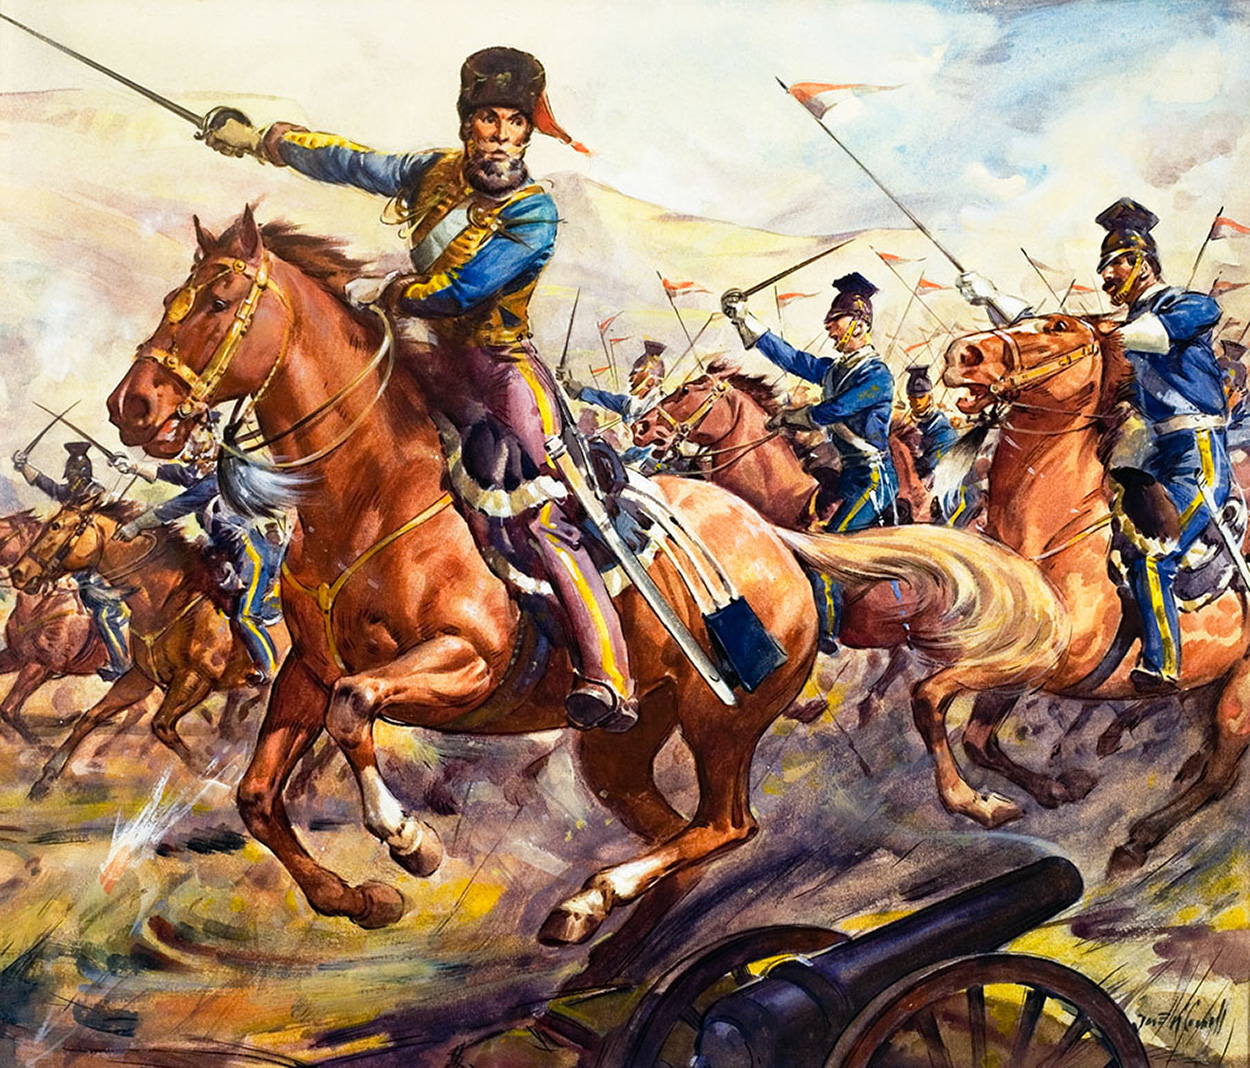 The Charge of the Light Brigade (Original) (Signed) art by James E McConnell at The Illustration Art Gallery